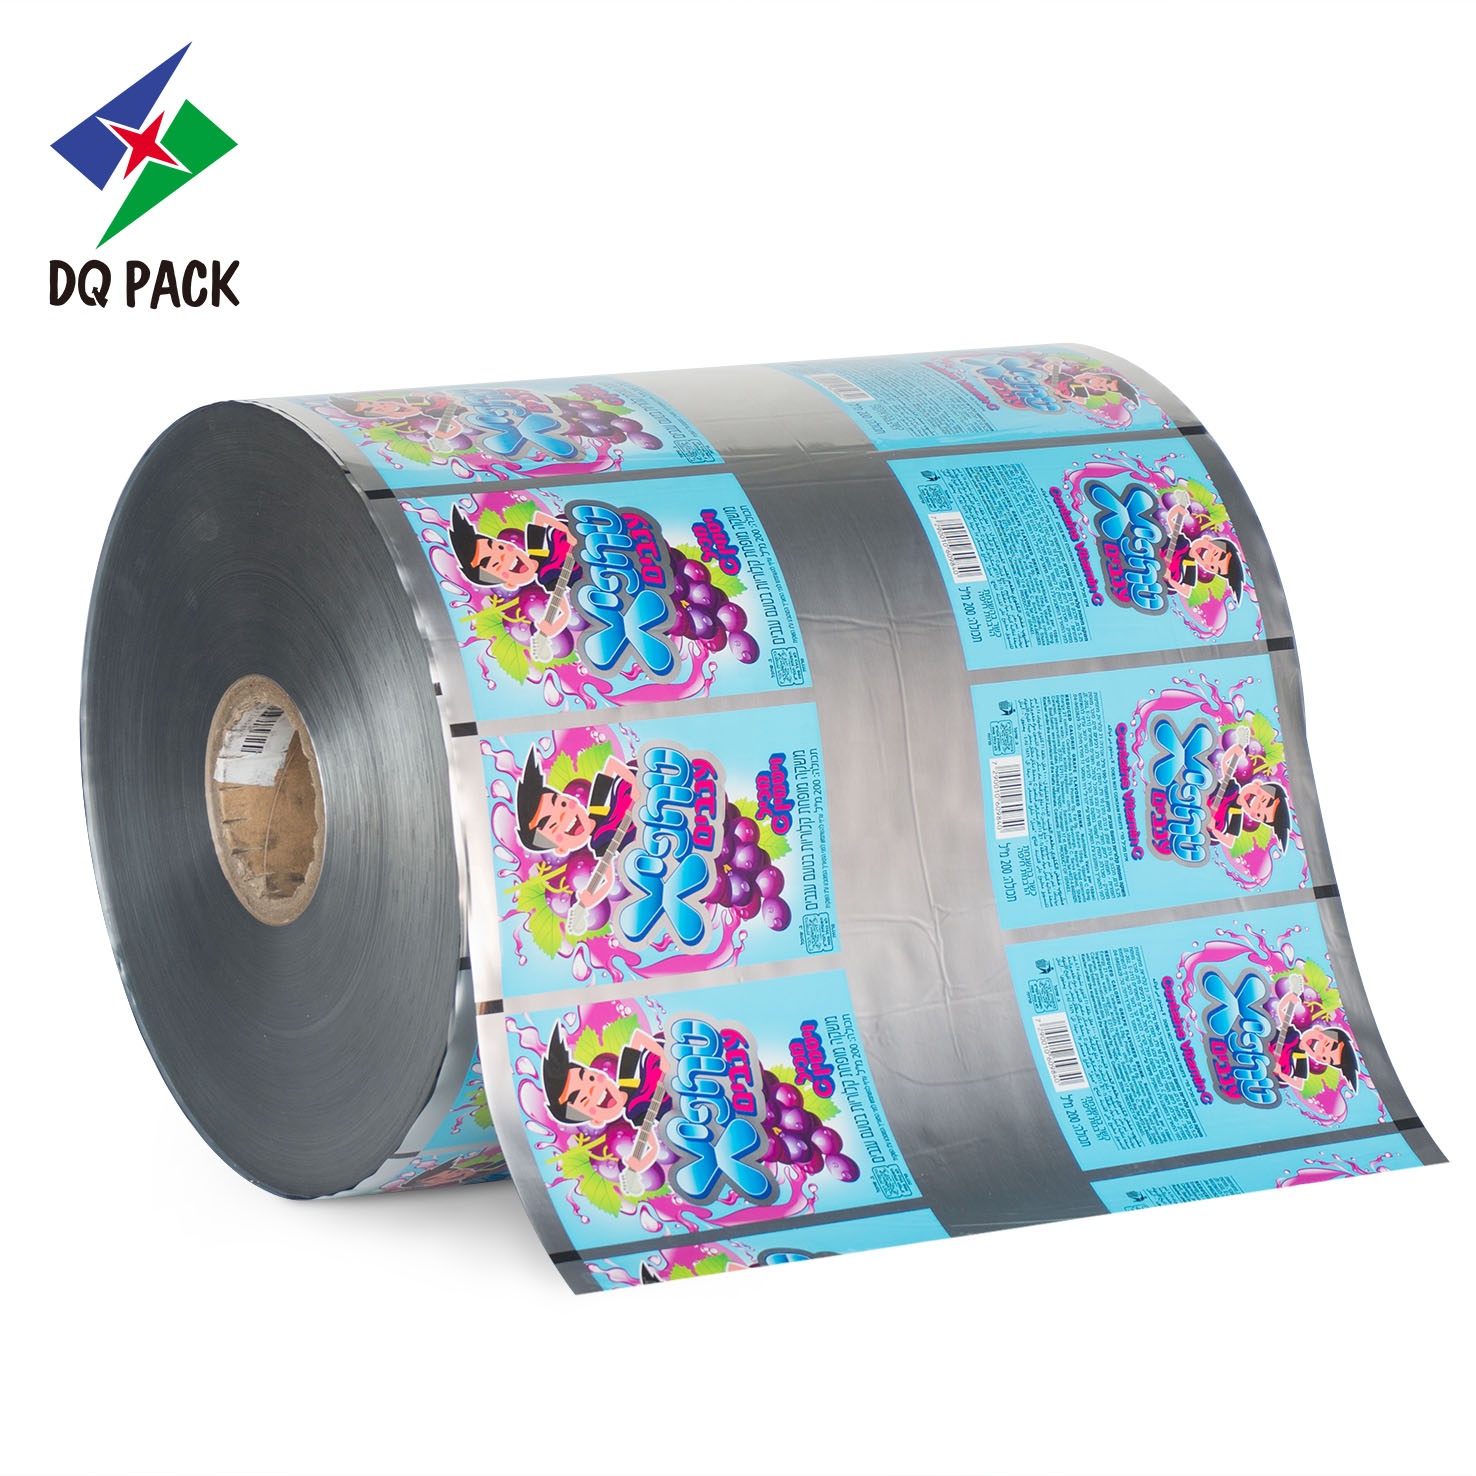 DQ PACK Plastic Aluminum Laminated Juice Plastic Packaging With Hole Punching For Straw